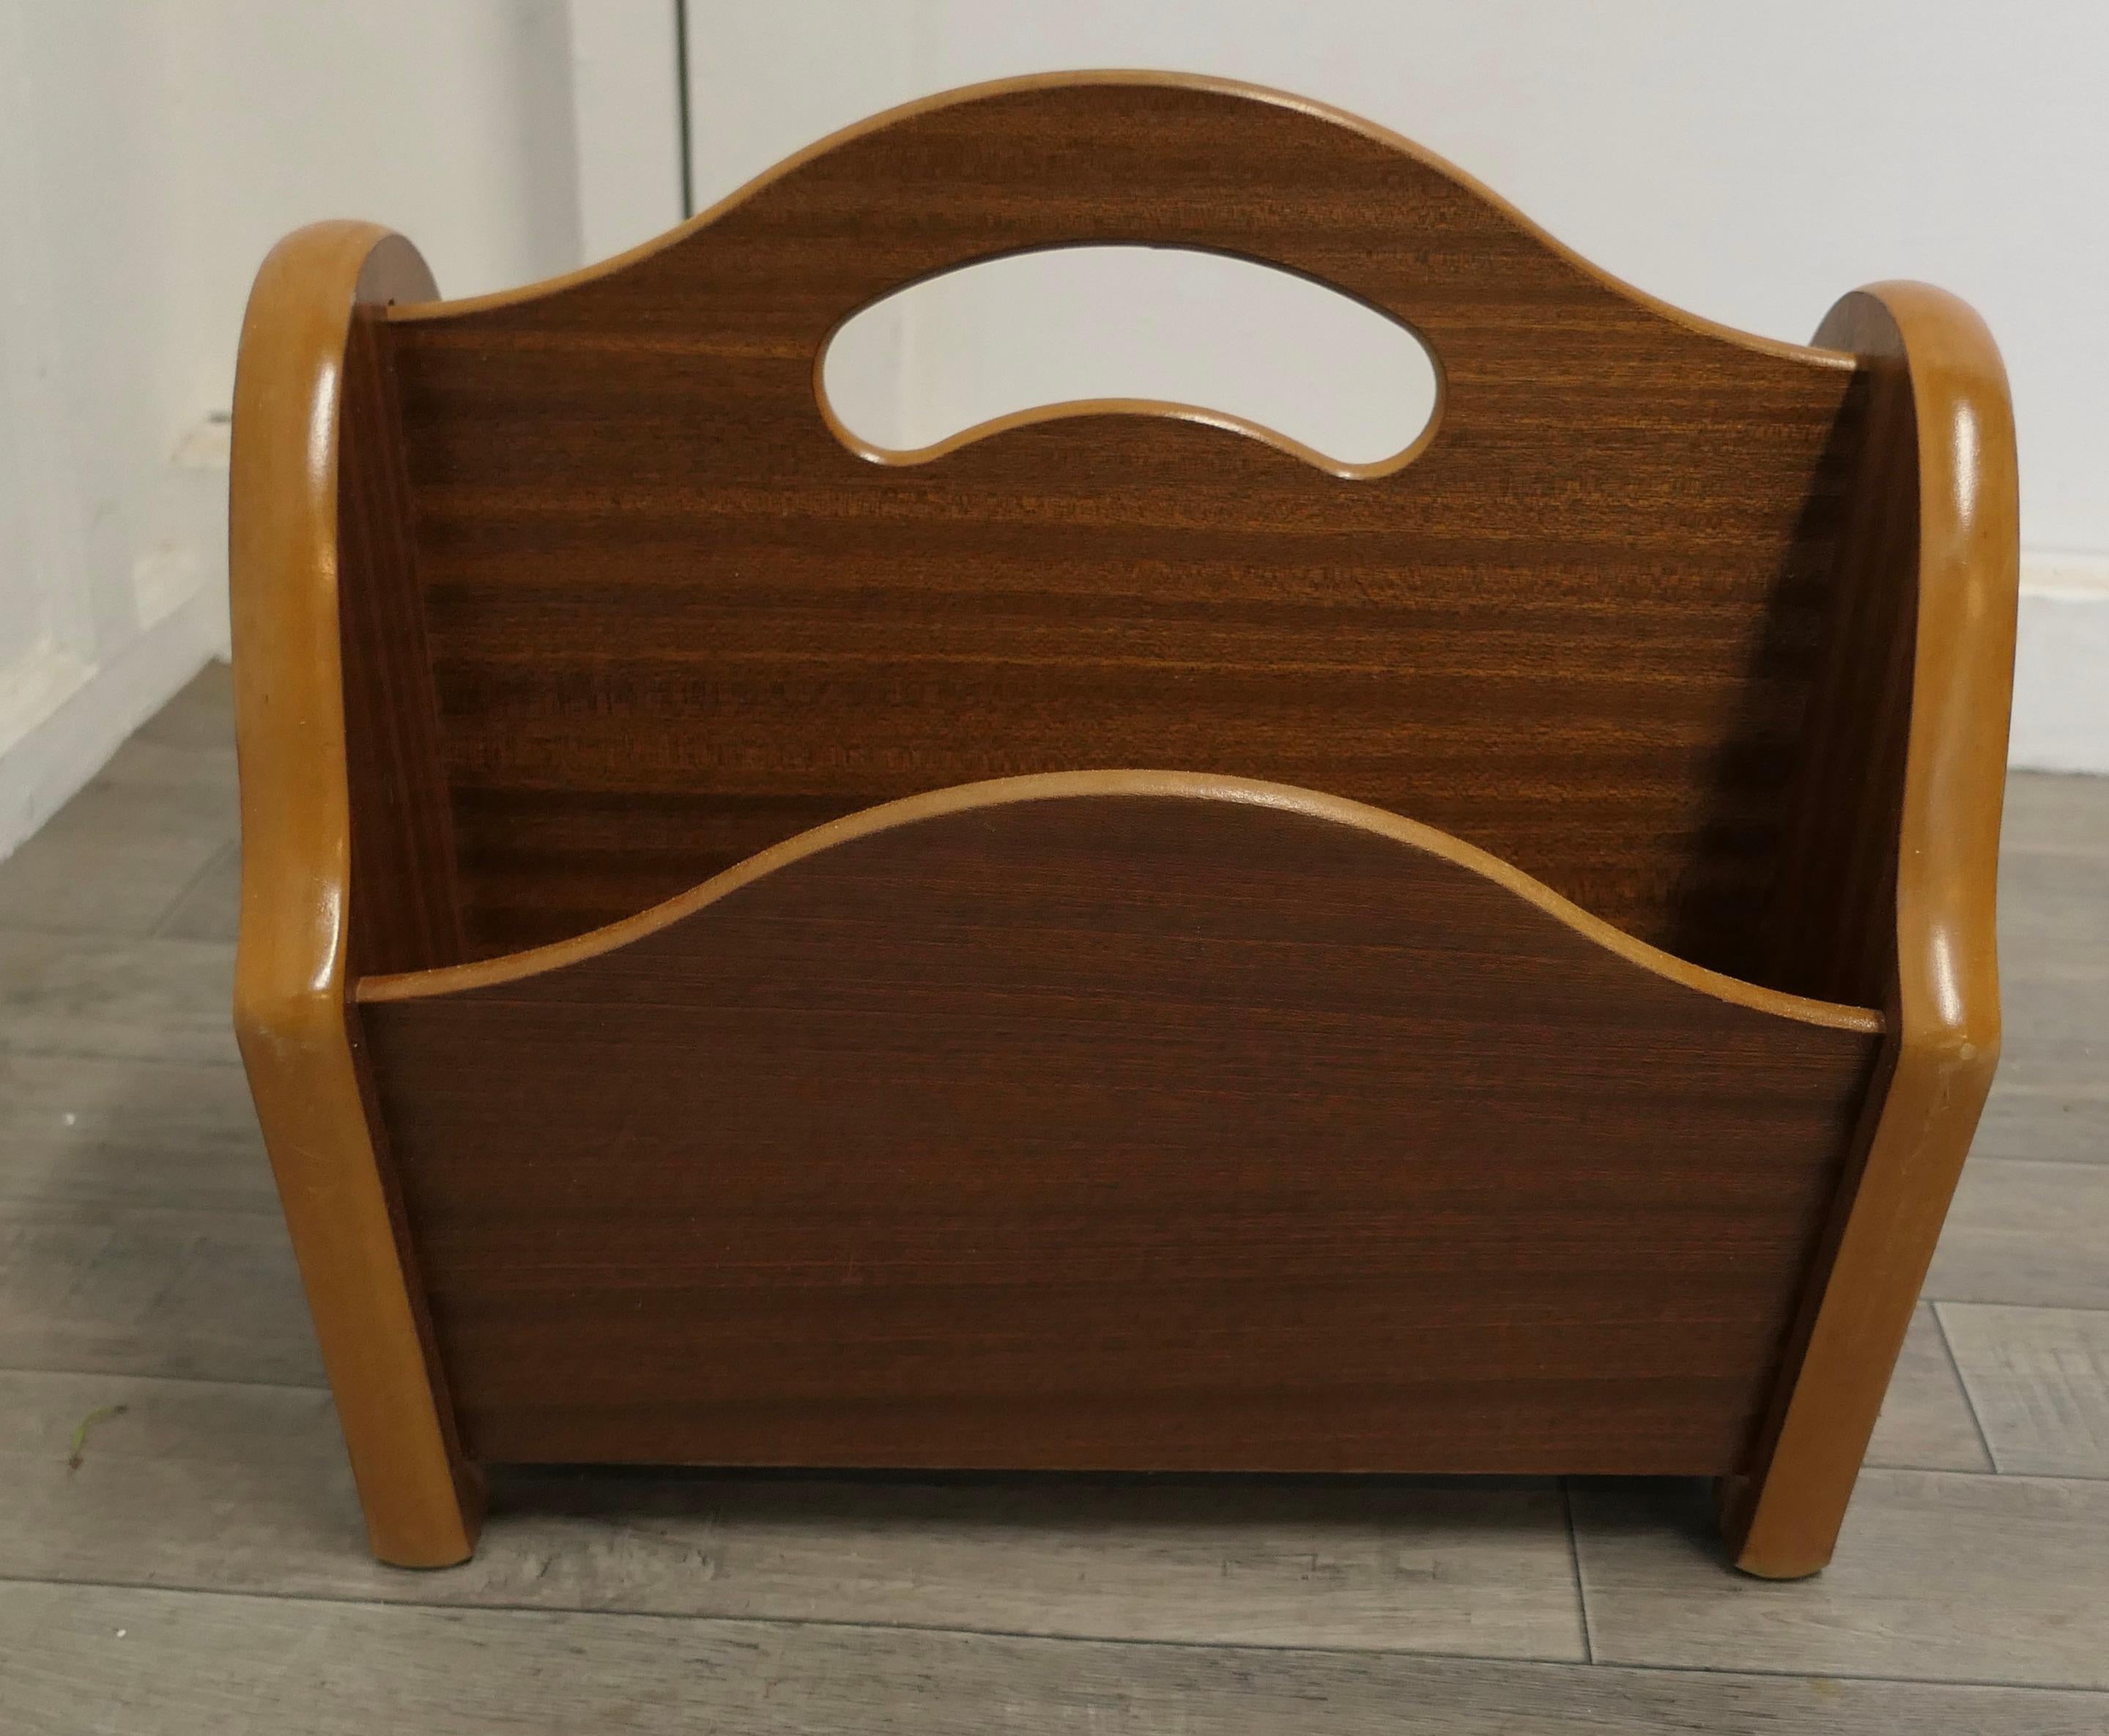 Midcentury teak canterbury or magazine rack.

This is a pretty little piece, in Teak, it has 2 magazine sections and it stands on a flat base with shaped ends and has a hand hold in the centre 
An excellent and good looking piece, it is in good